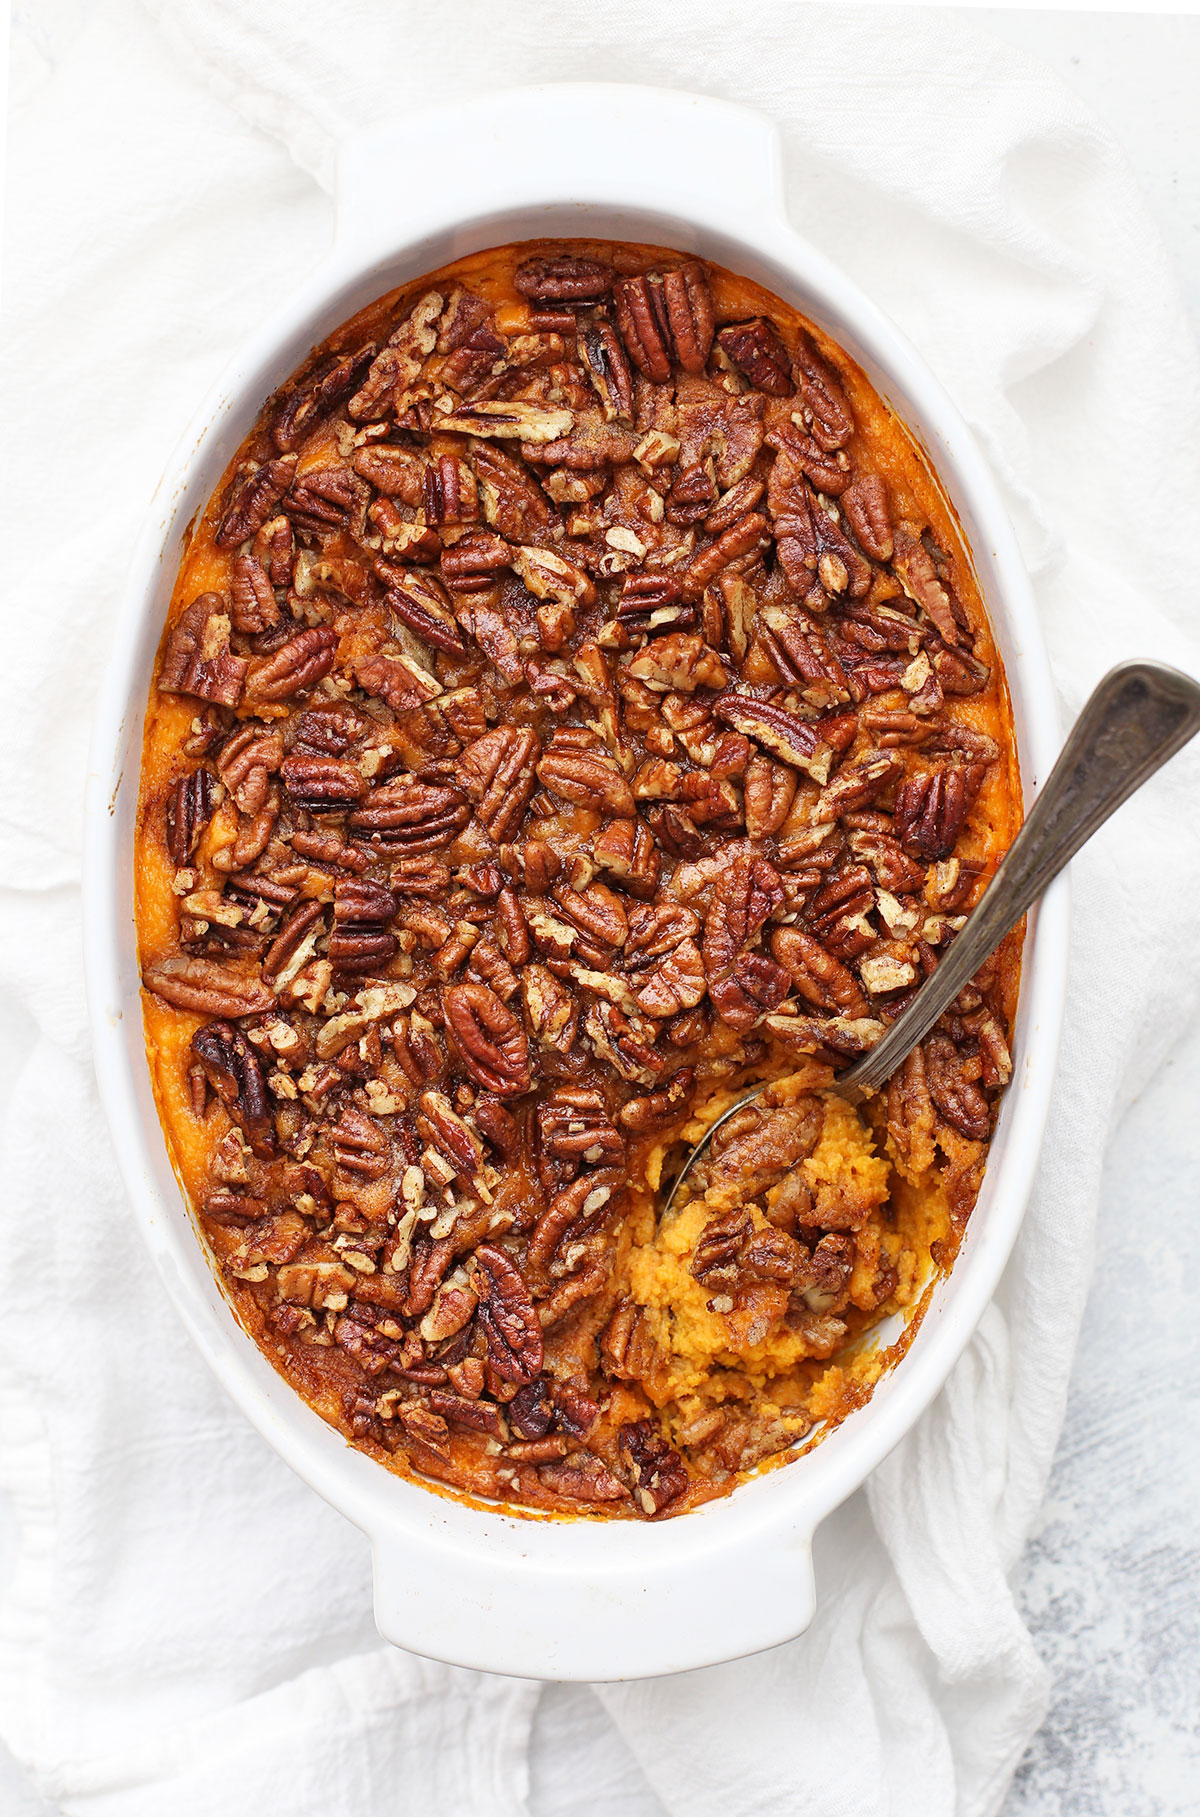 Overhead view of paleo sweet potato casserole with a spoon in it.